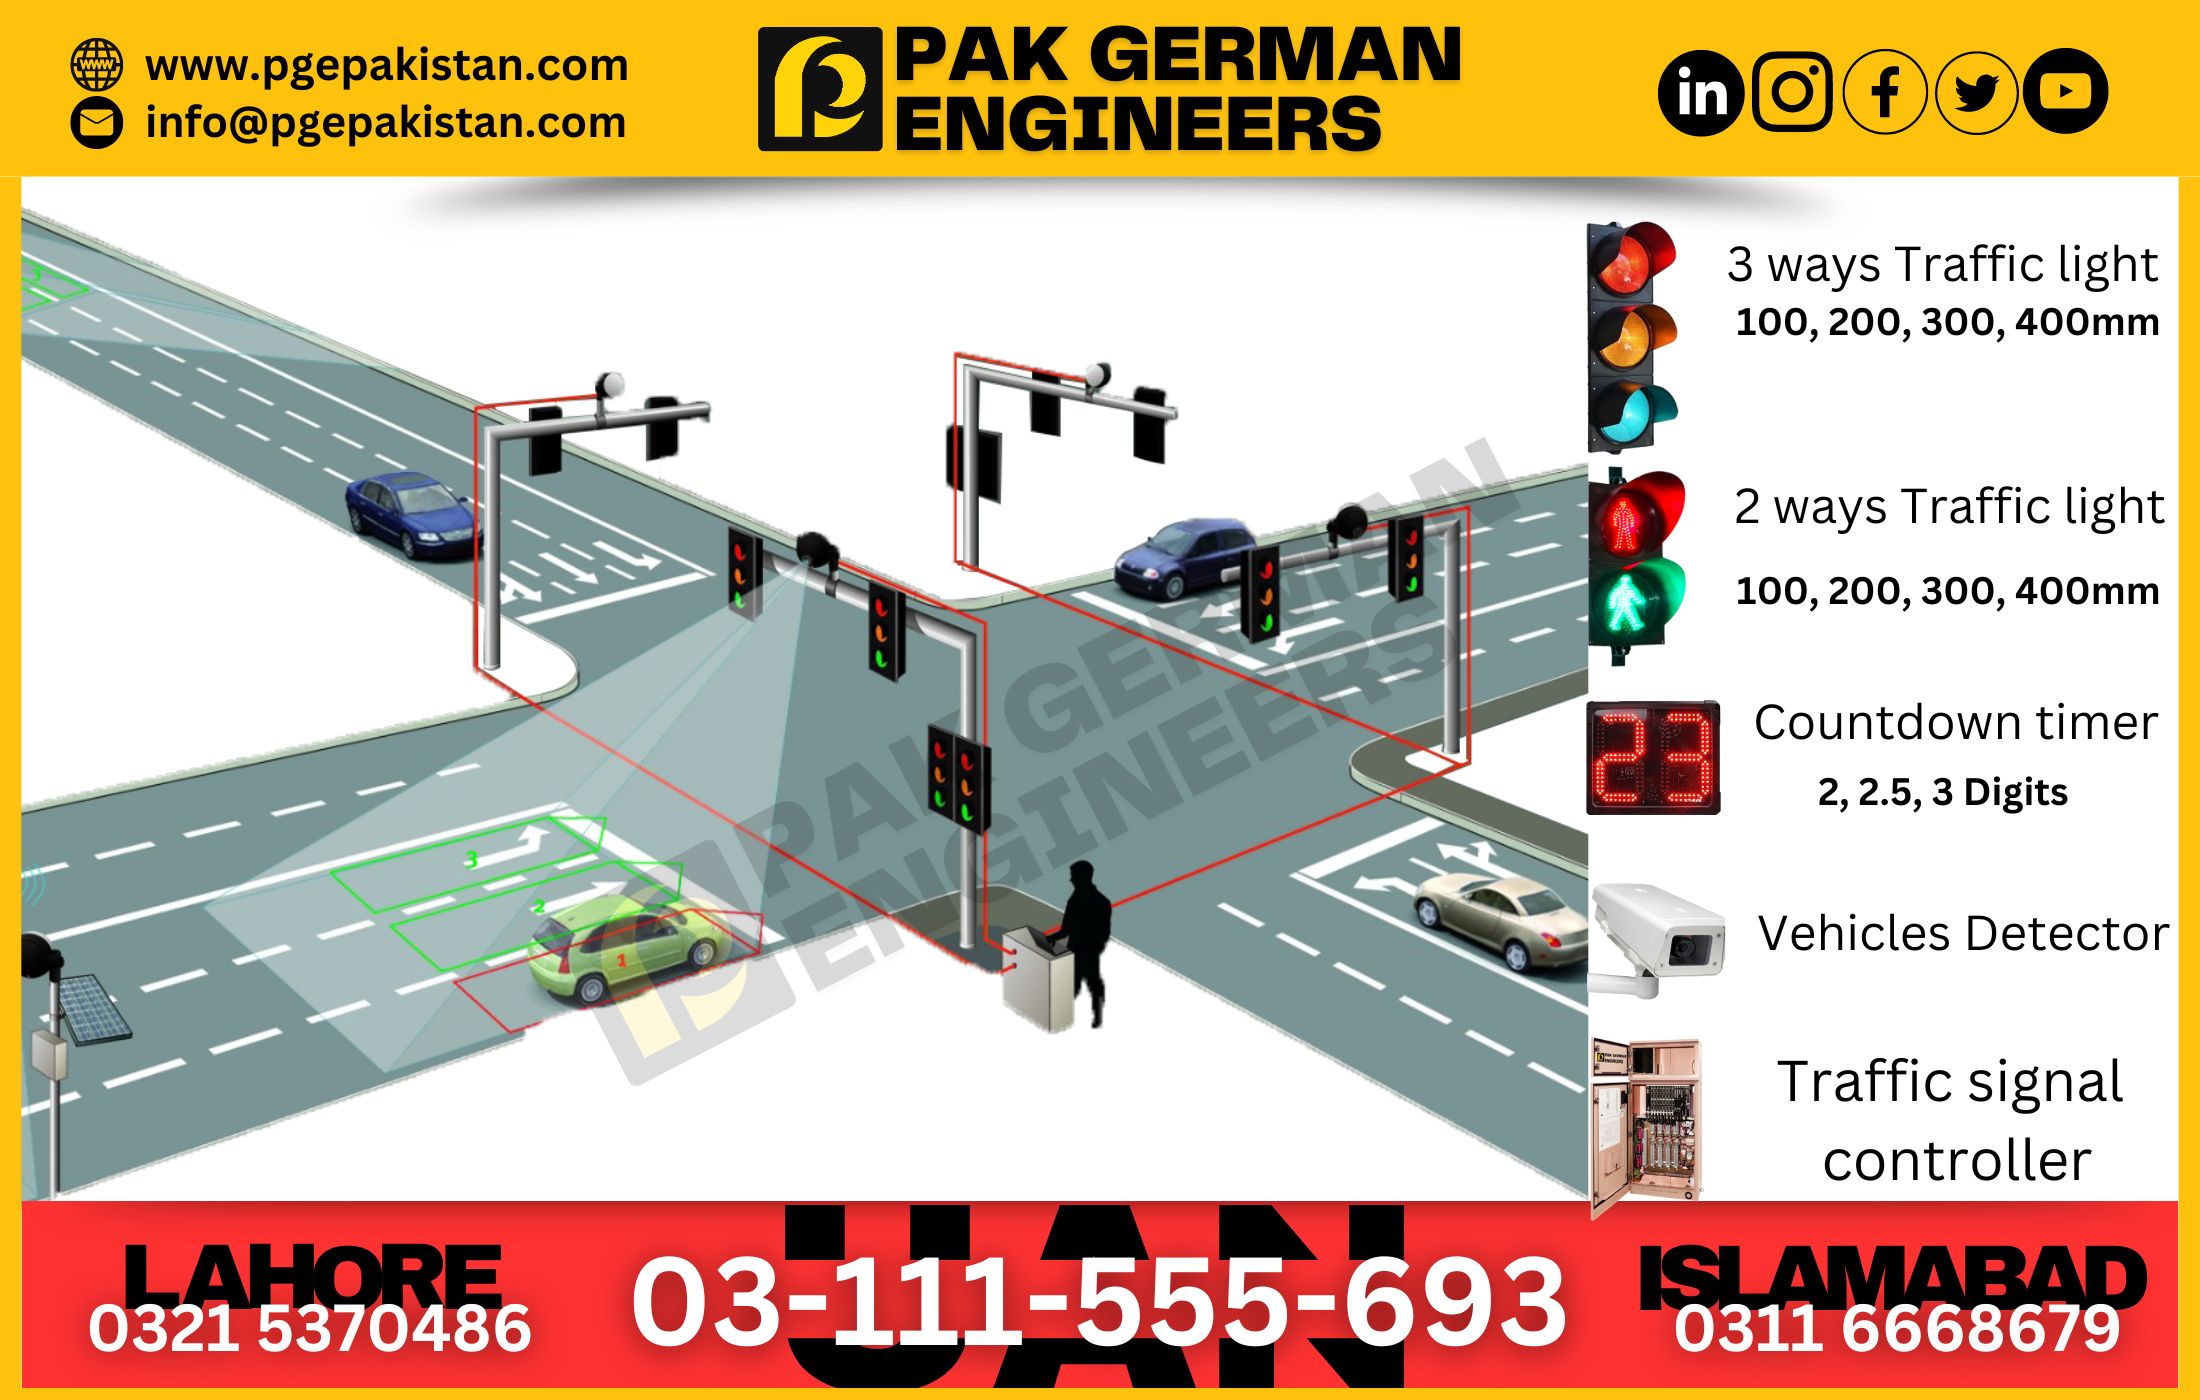 300mm 3-way LED Traffic Lights with traffic Modules and complete Accessories.